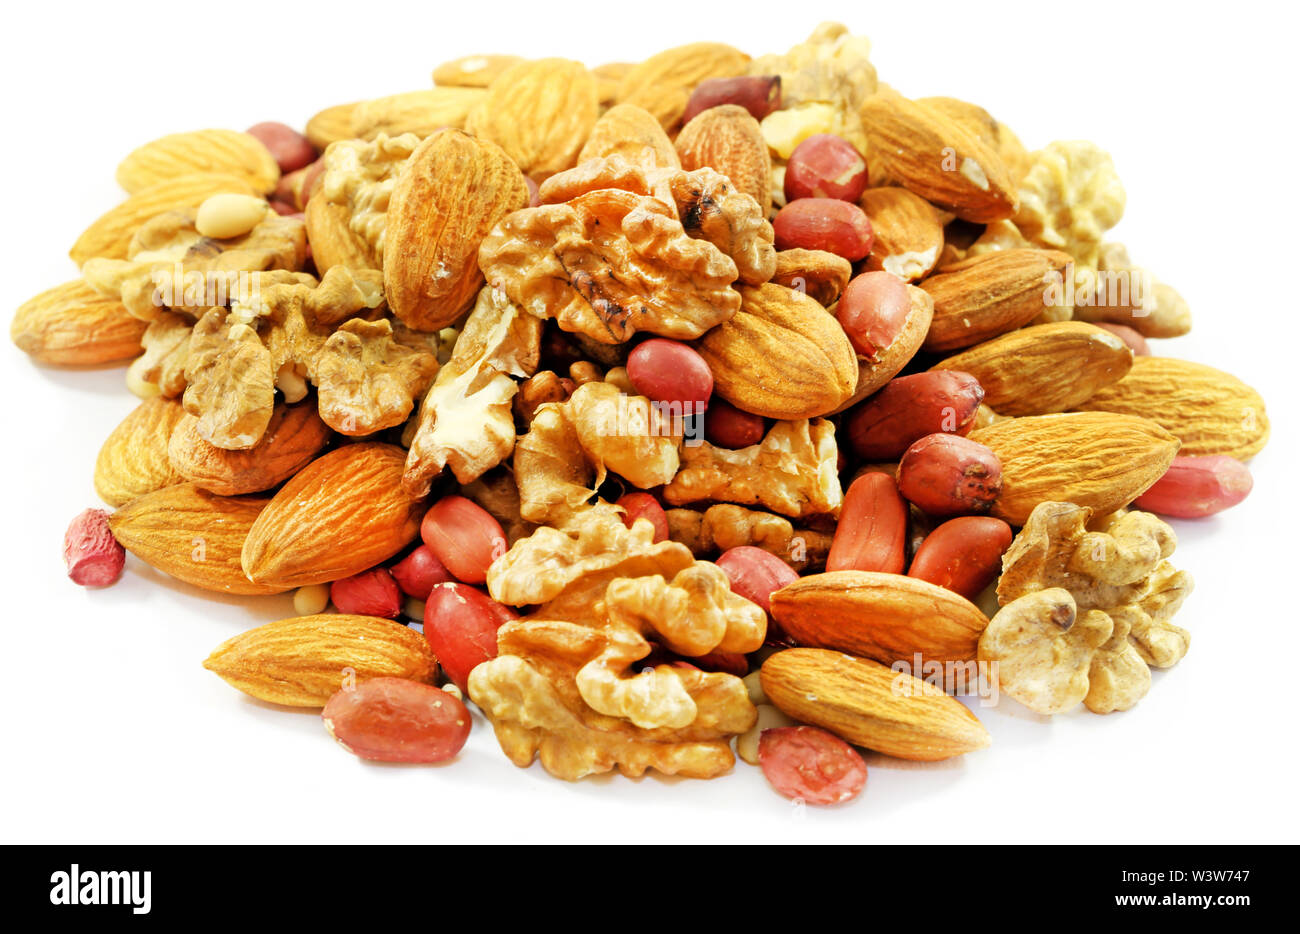 walnut, almond peanuts and pine nuts photographed near Stock Photo